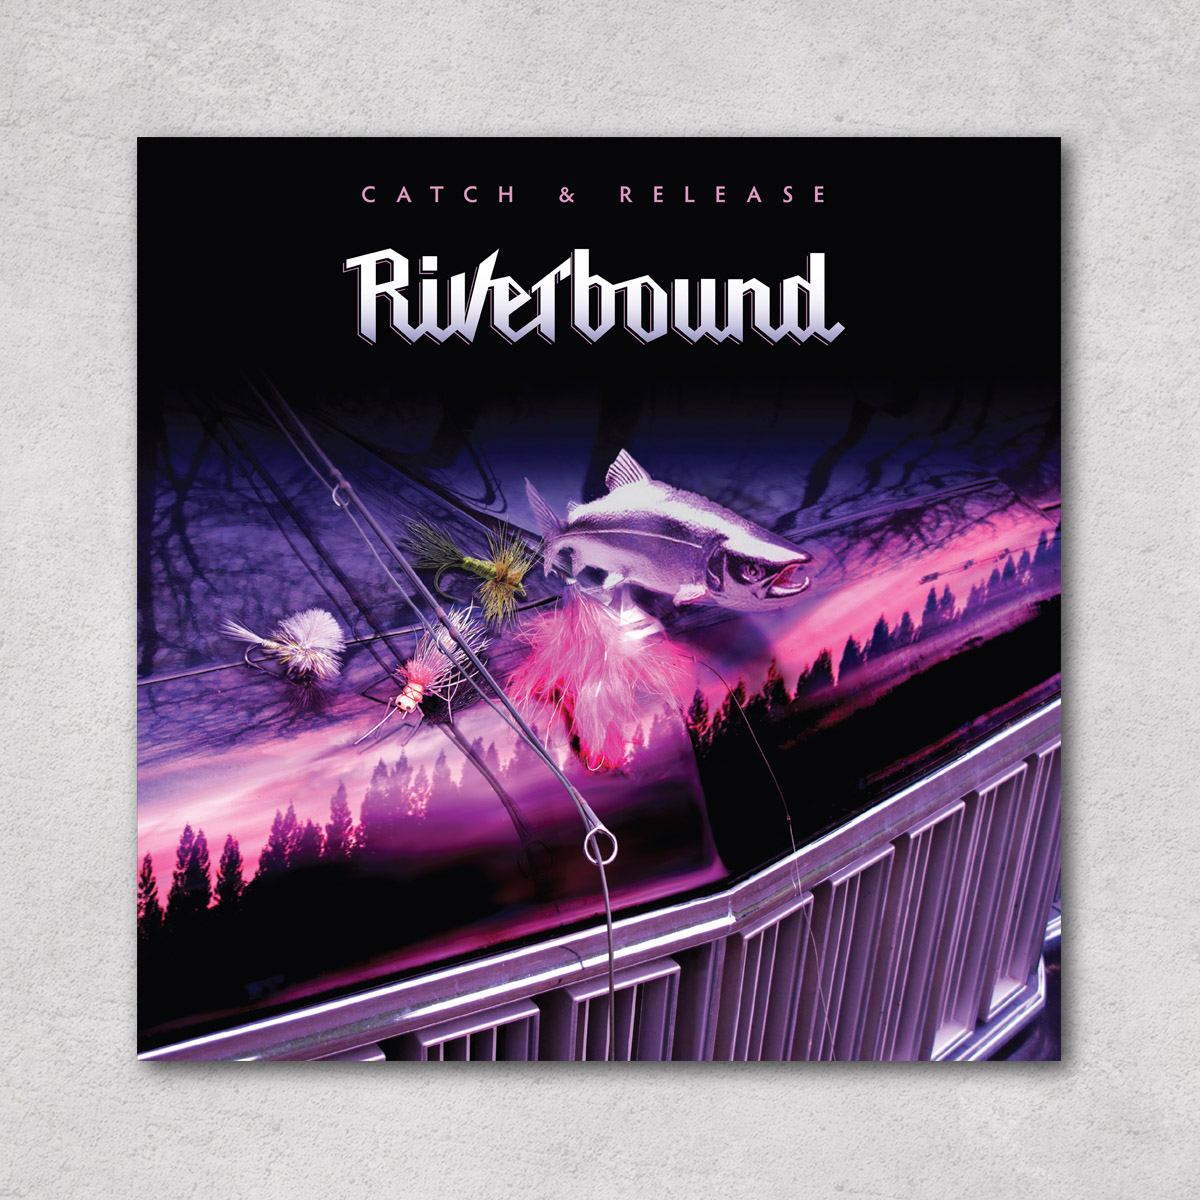 Cover of Riverbound CD